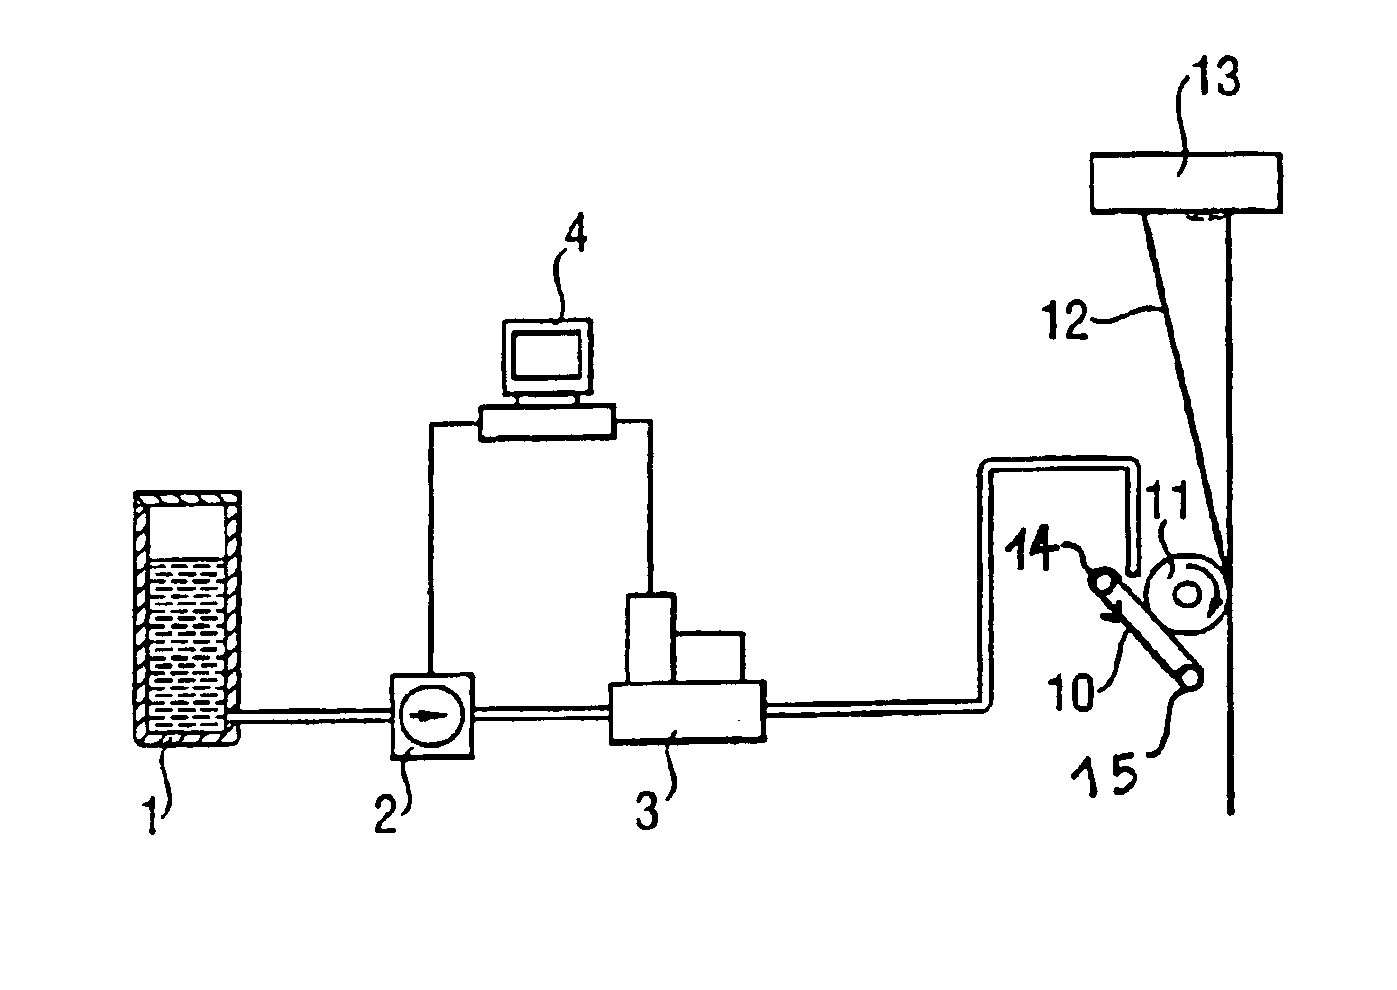 Method for making yarn and products comprising same